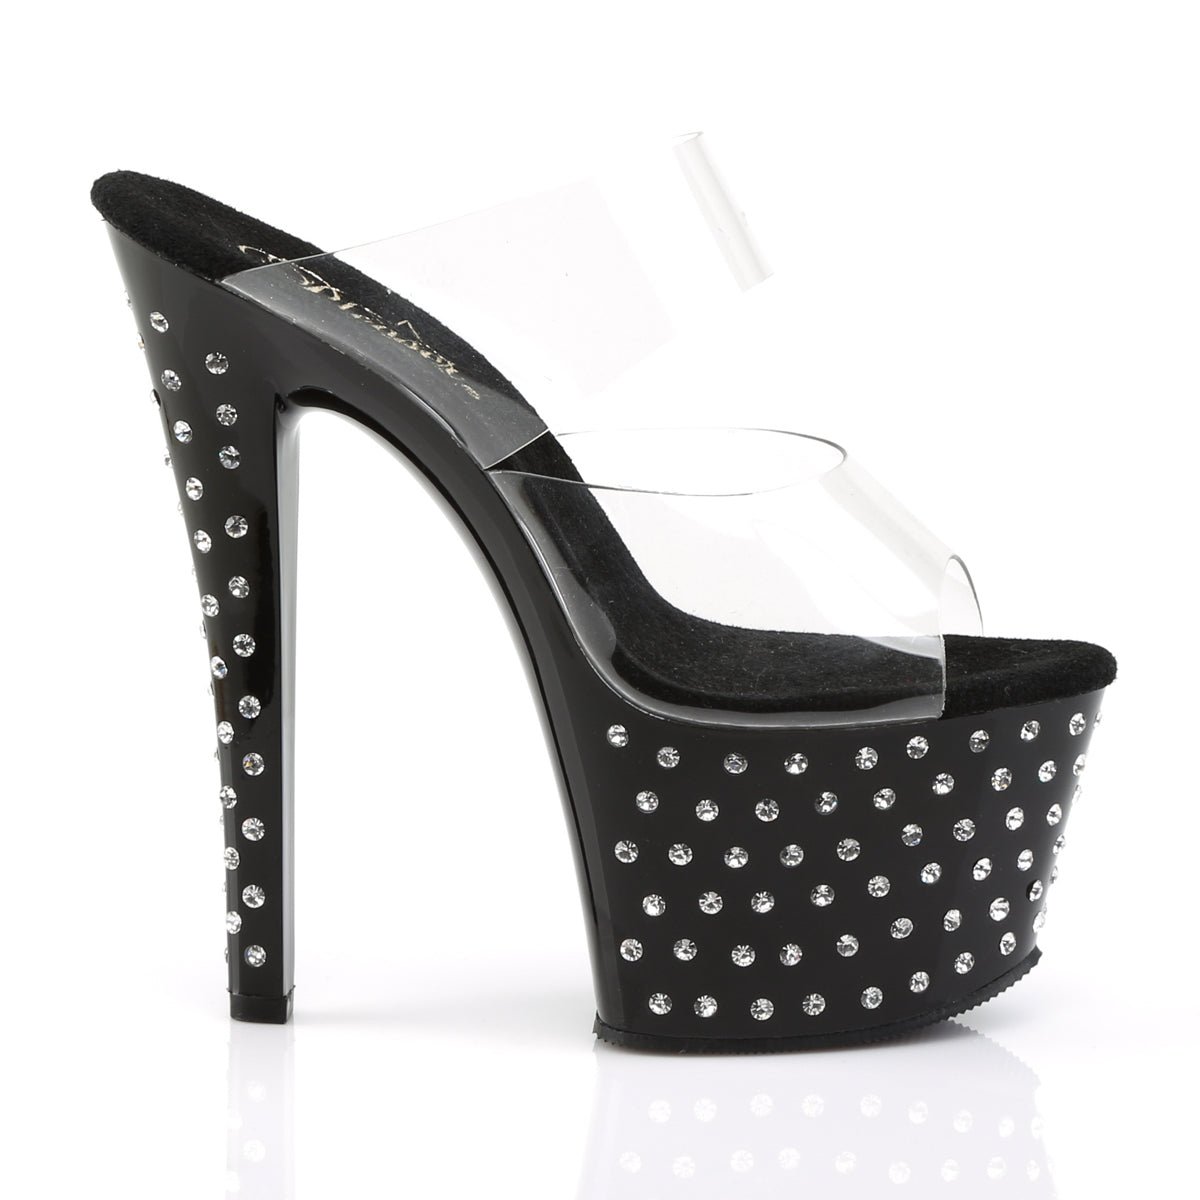 STARDUST-702 7" Heel Clear and Black Pole Dancing Platforms-Pleaser- Sexy Shoes Fetish Heels